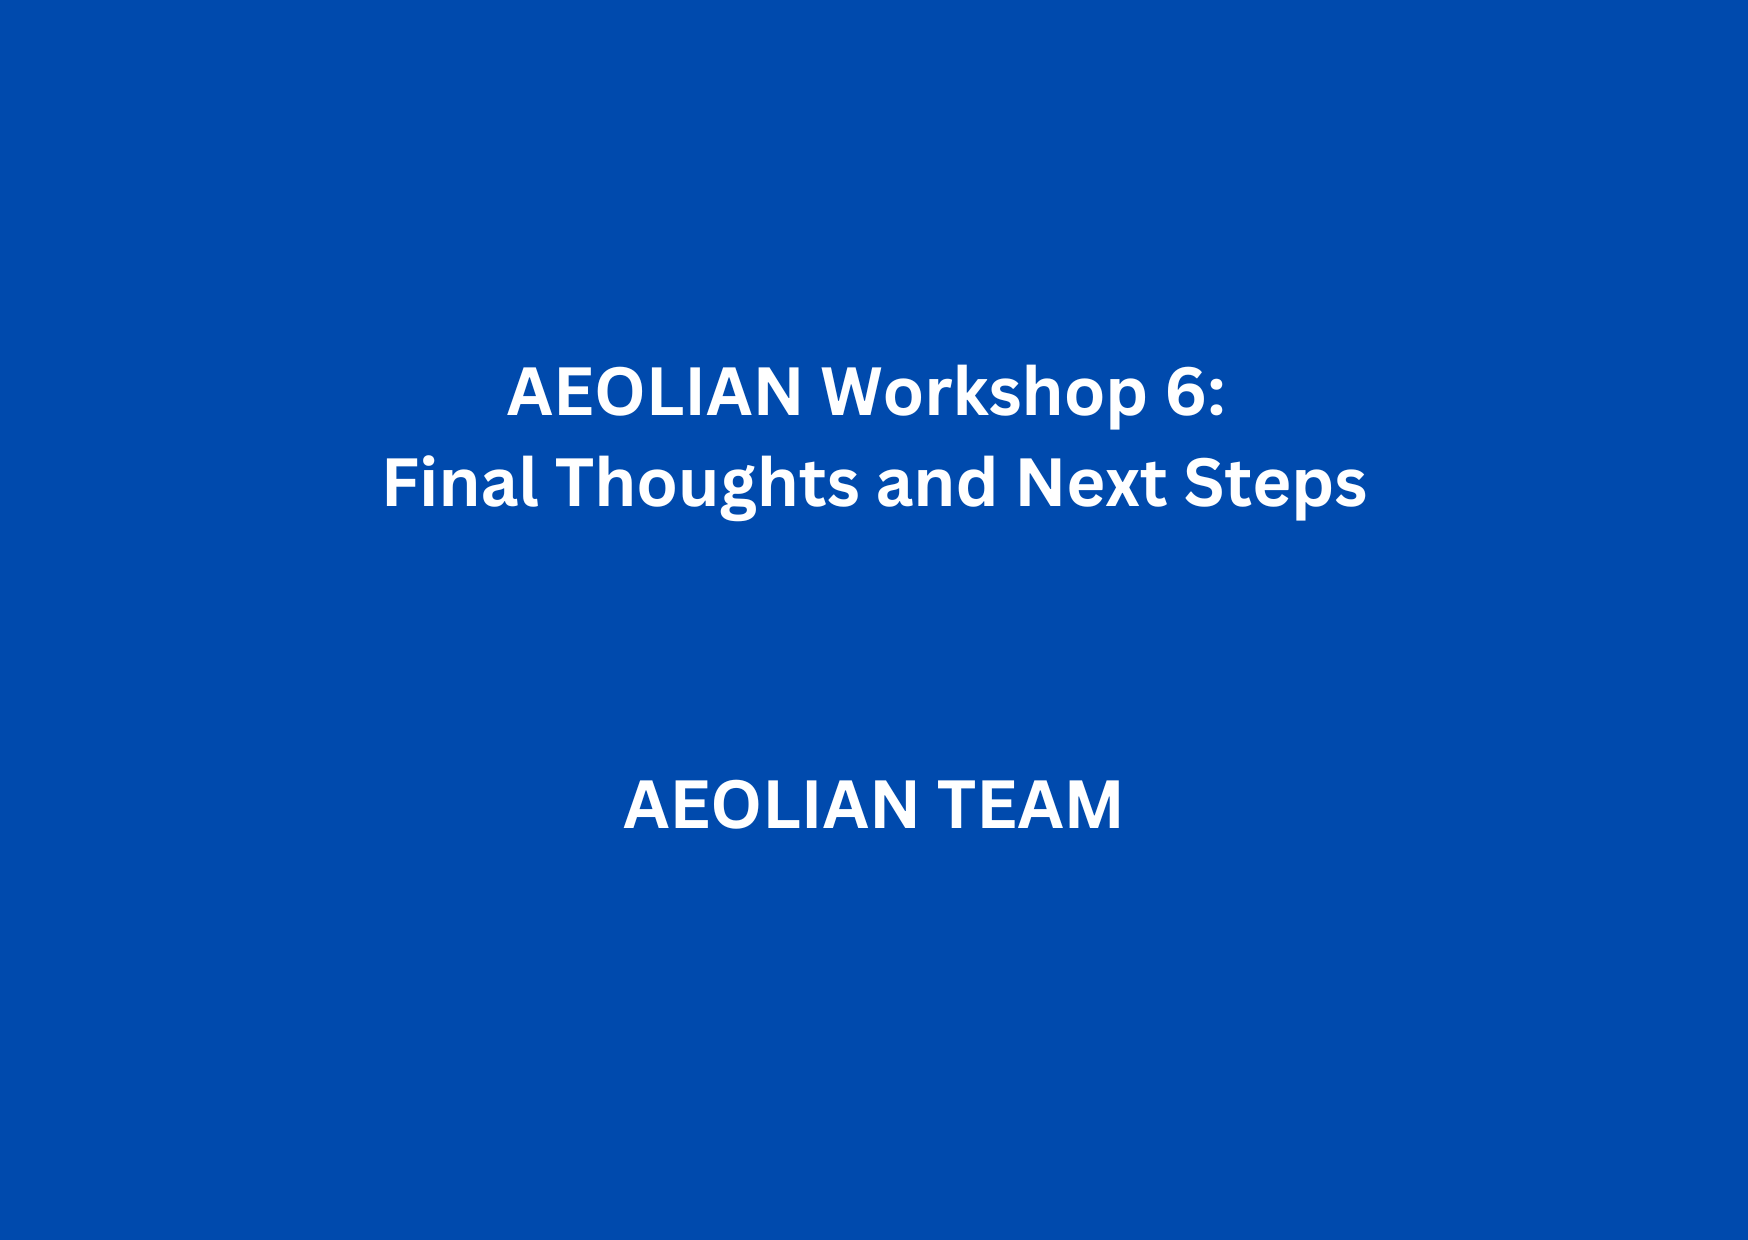 AEOLIAN Workshop 6: Final Thoughts and Next Steps